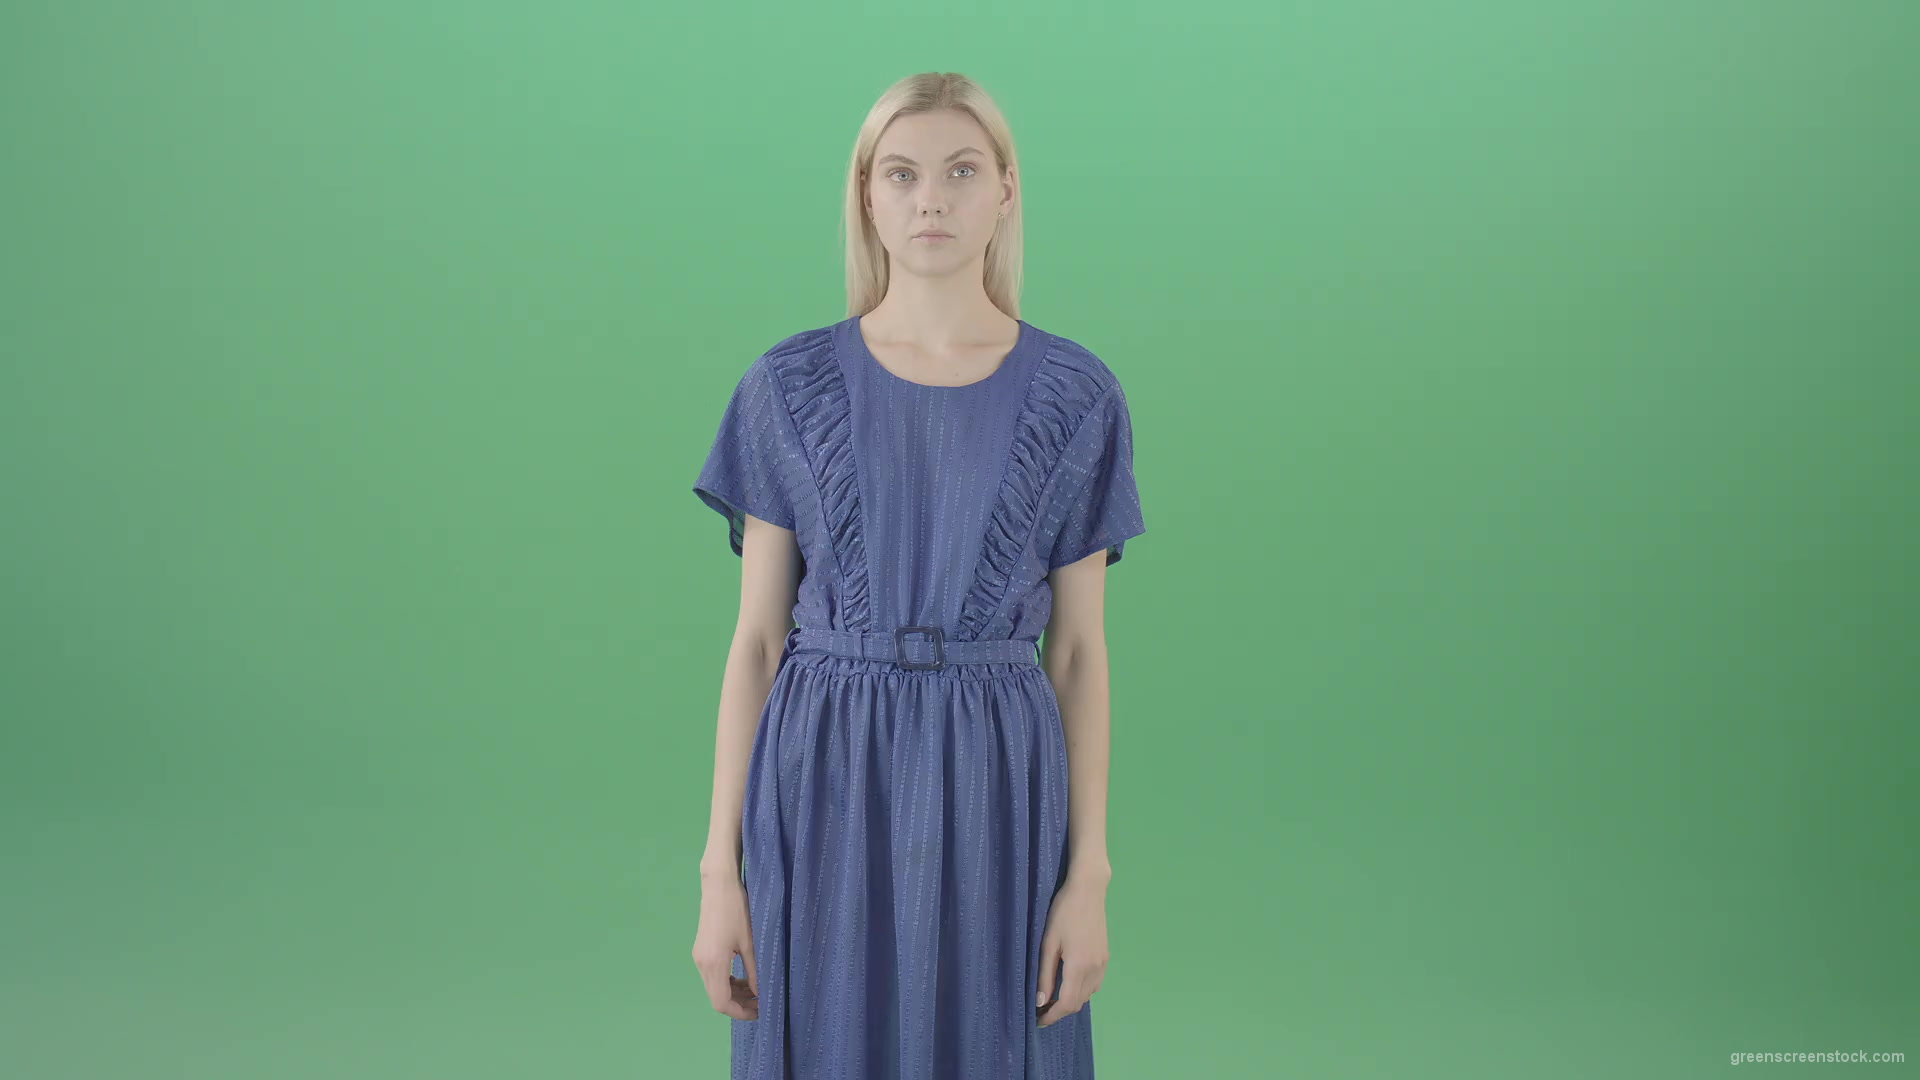 Boring-blonde-girl-in-blue-costume-can-not-find-virtual-products-on-touch-screen-isolated-on-green-background-4K-Video-Footage--1920_001 Green Screen Stock